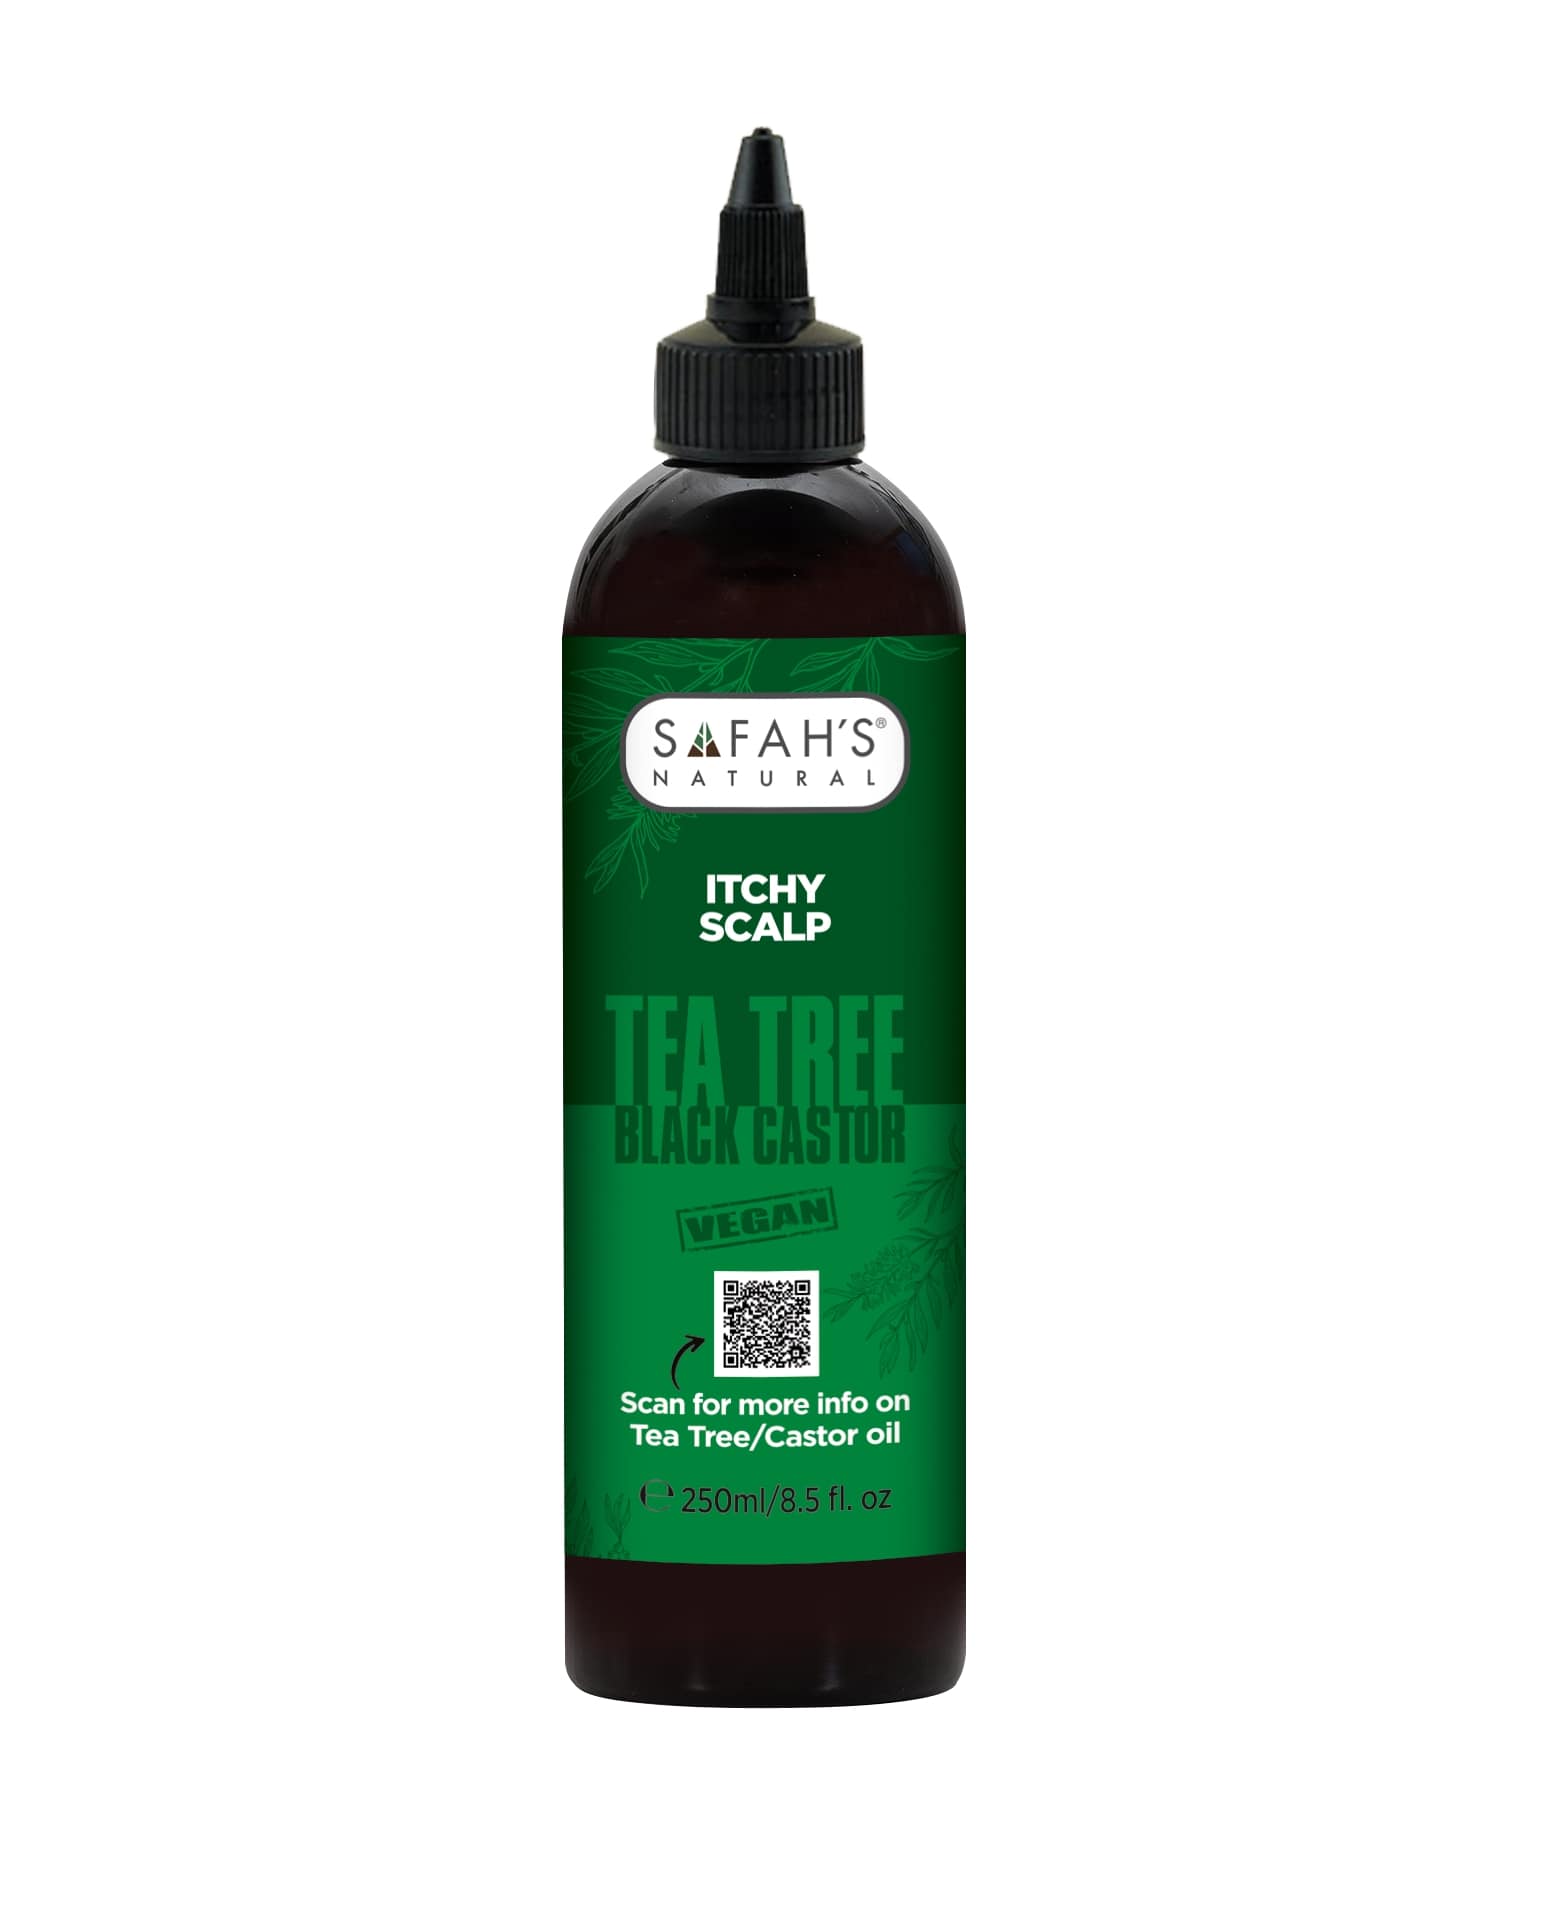 natural Jamaican Black Castor Tea Tree Oil - Nature's Double Duty Elixir for Hair and Skin